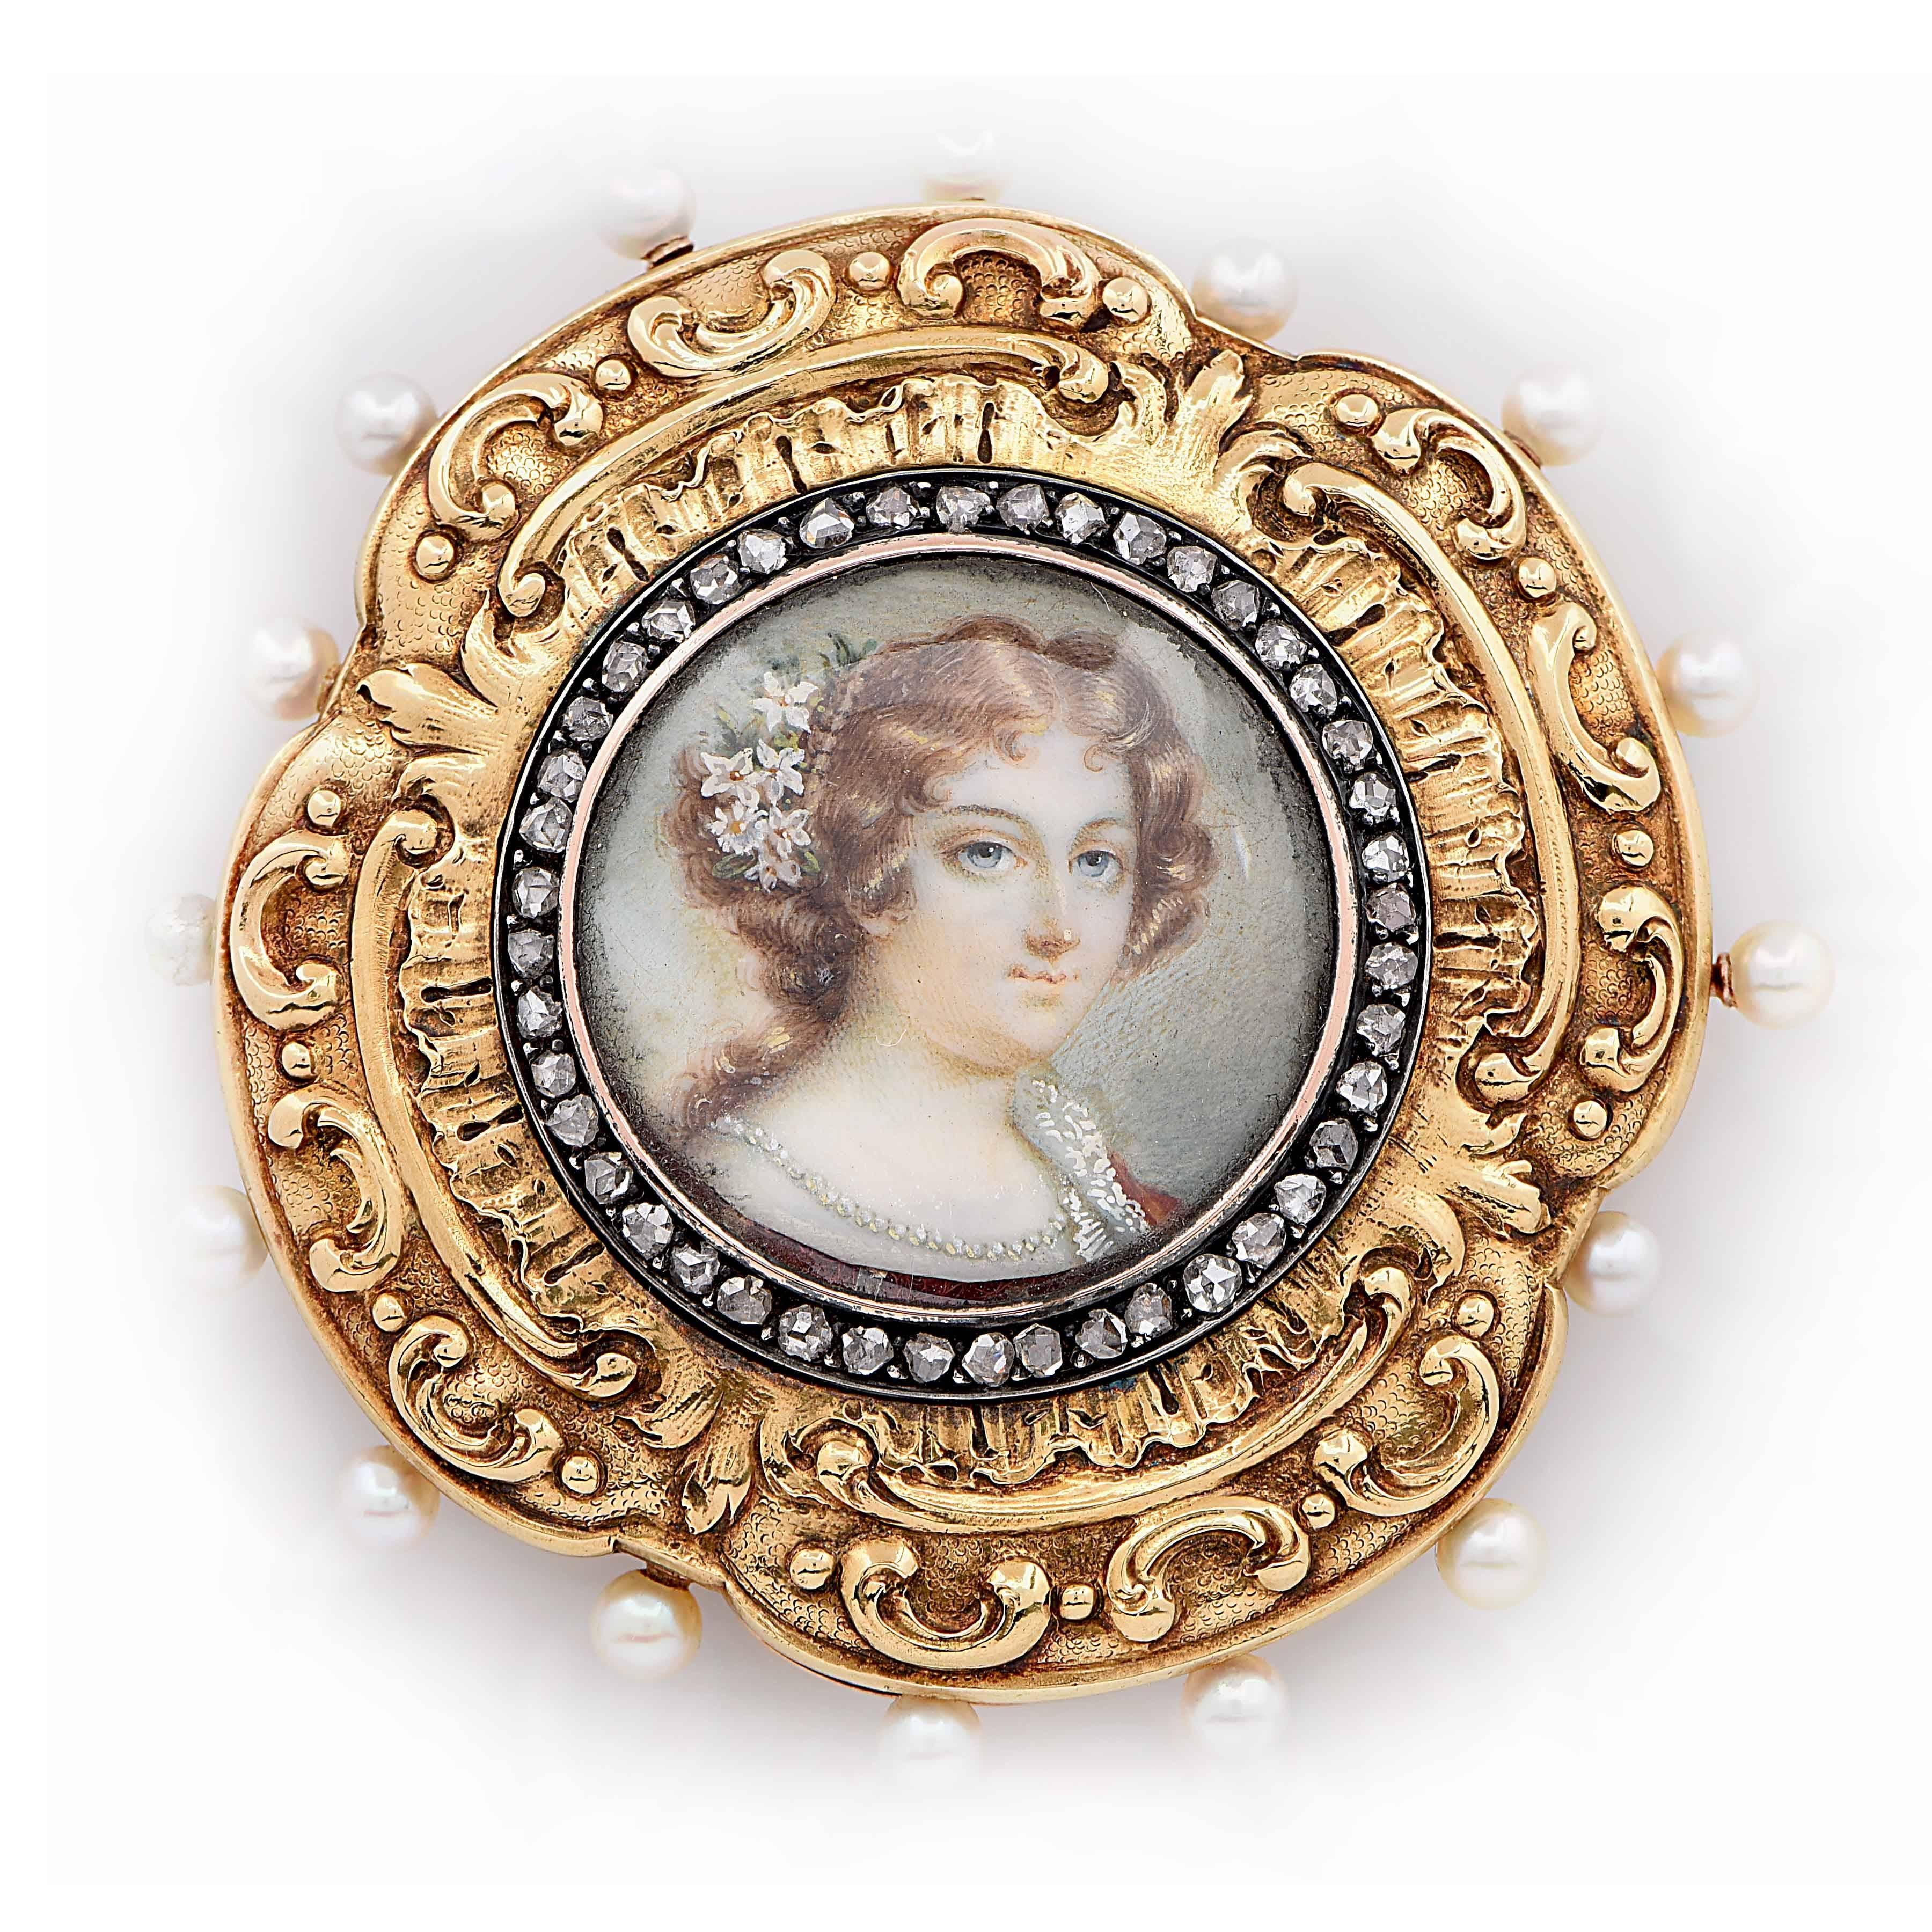 This miniature portrait of a young lady centers this unique gold pin 'cushion' with 14 removable pins, each topped with a pearl. Portrait is surrounded with small single cut old miner diamonds. Uniquely British and crafted with every possible detail